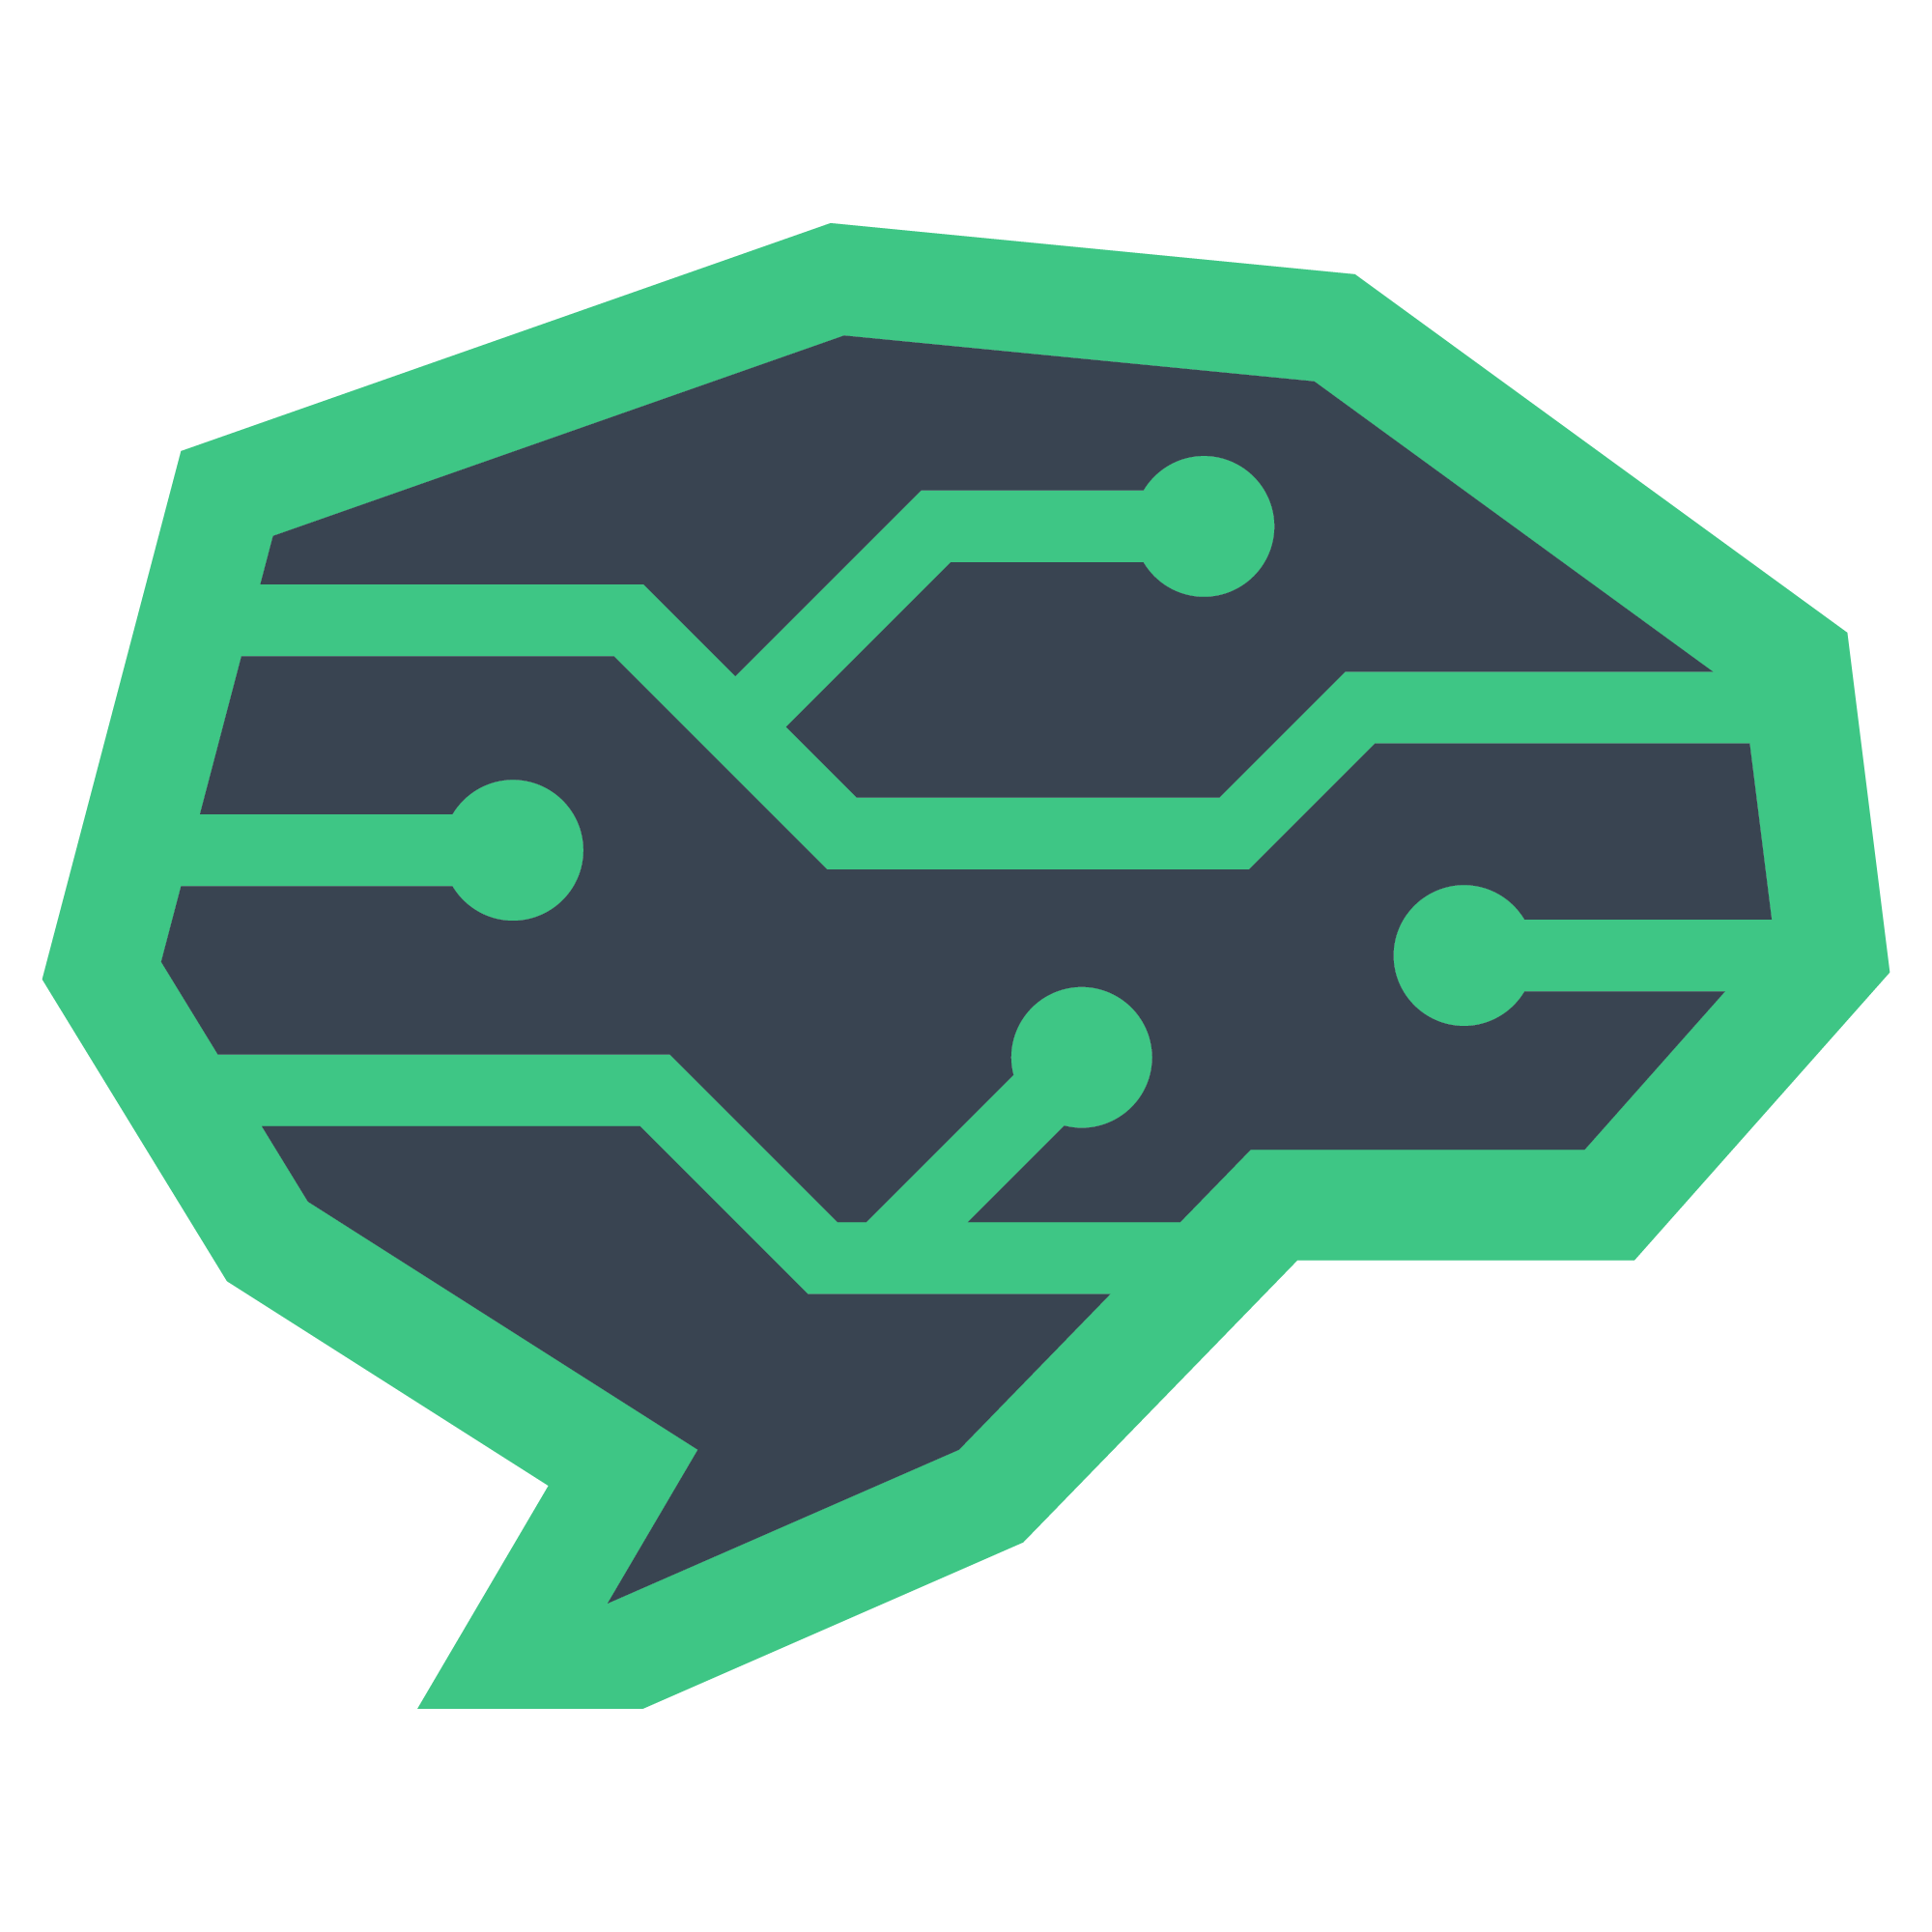 The Deepnetic logo. A speech bubble and a brain with neurons.